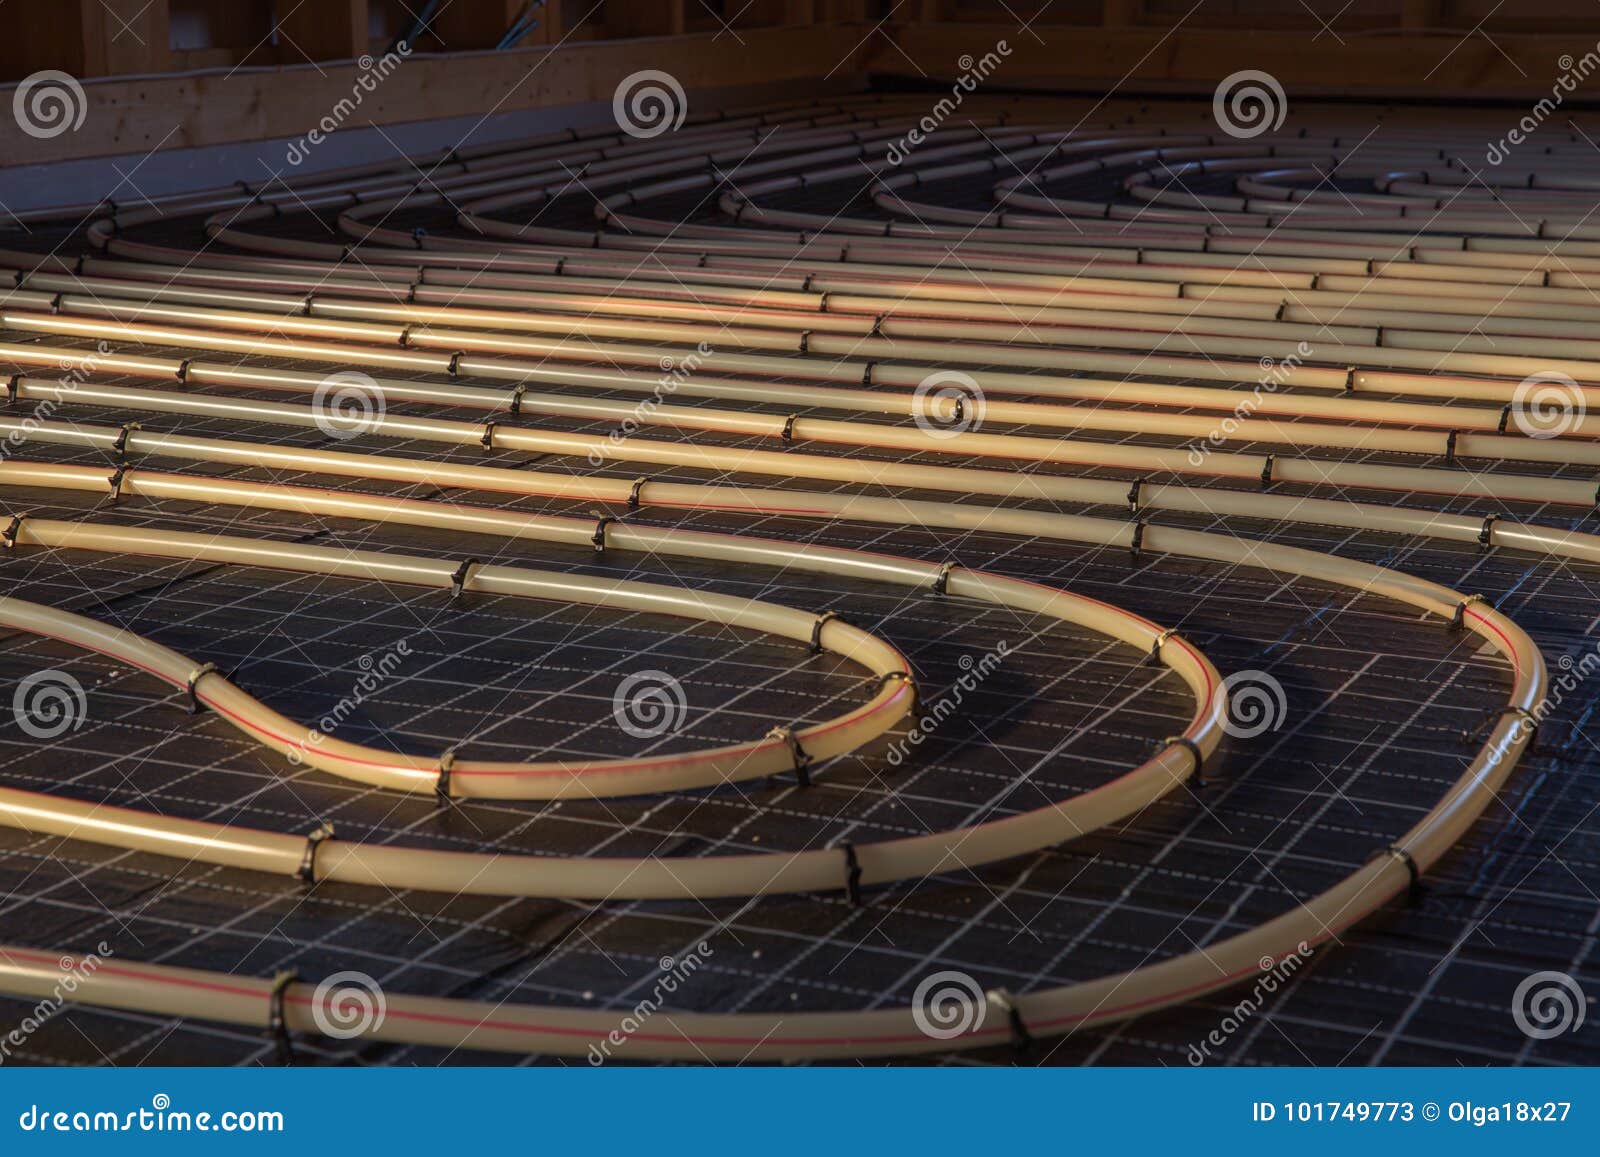 Radiant Floor Heating System Stock Image Image Of Pipeline